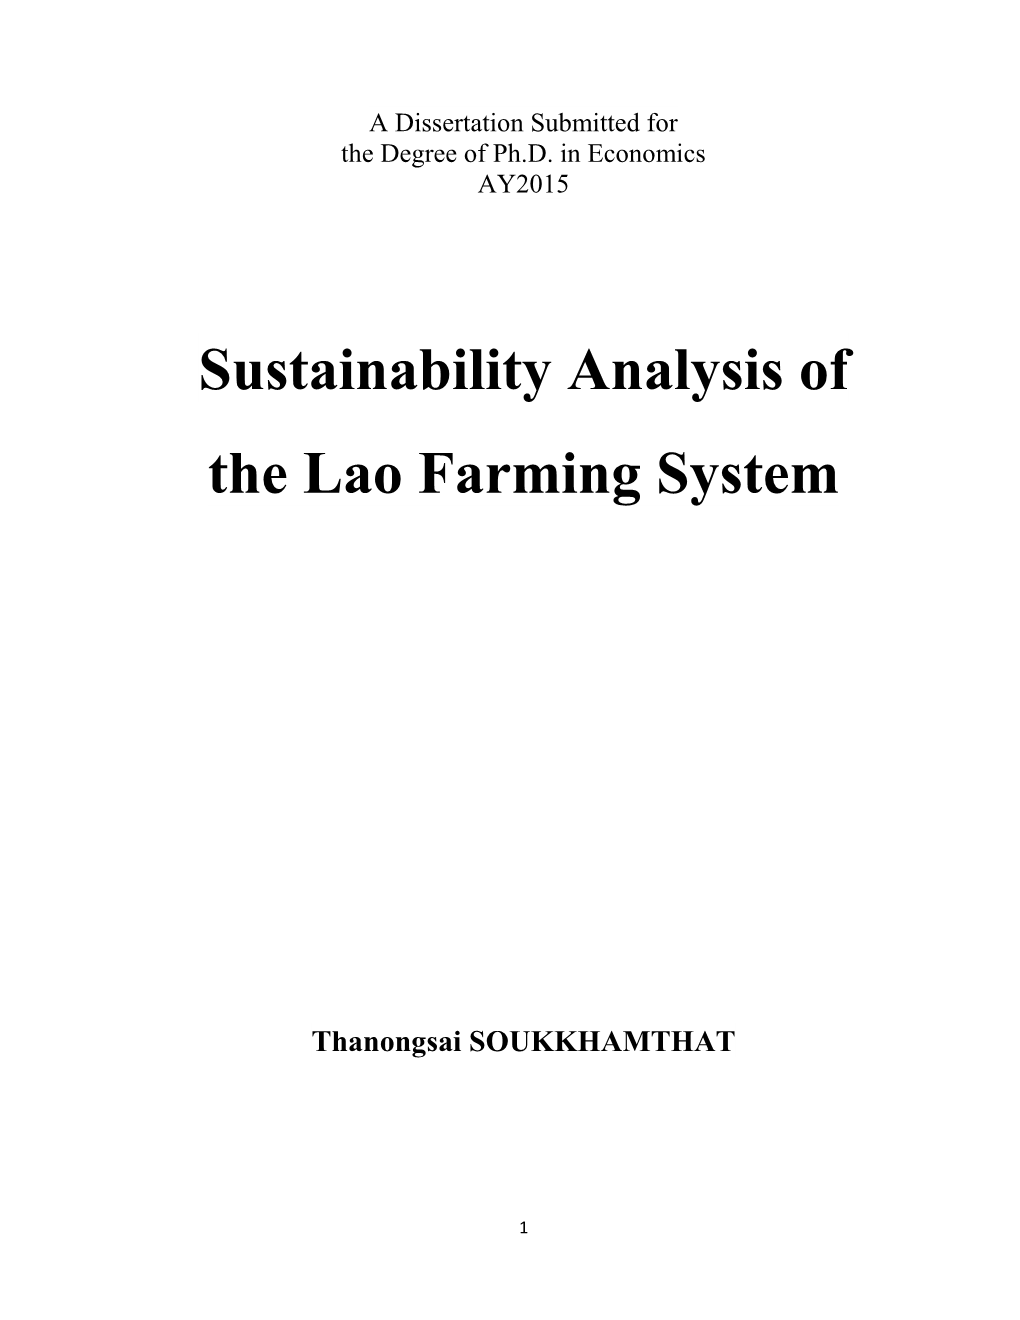 Sustainability Analysis of the Lao Farming System